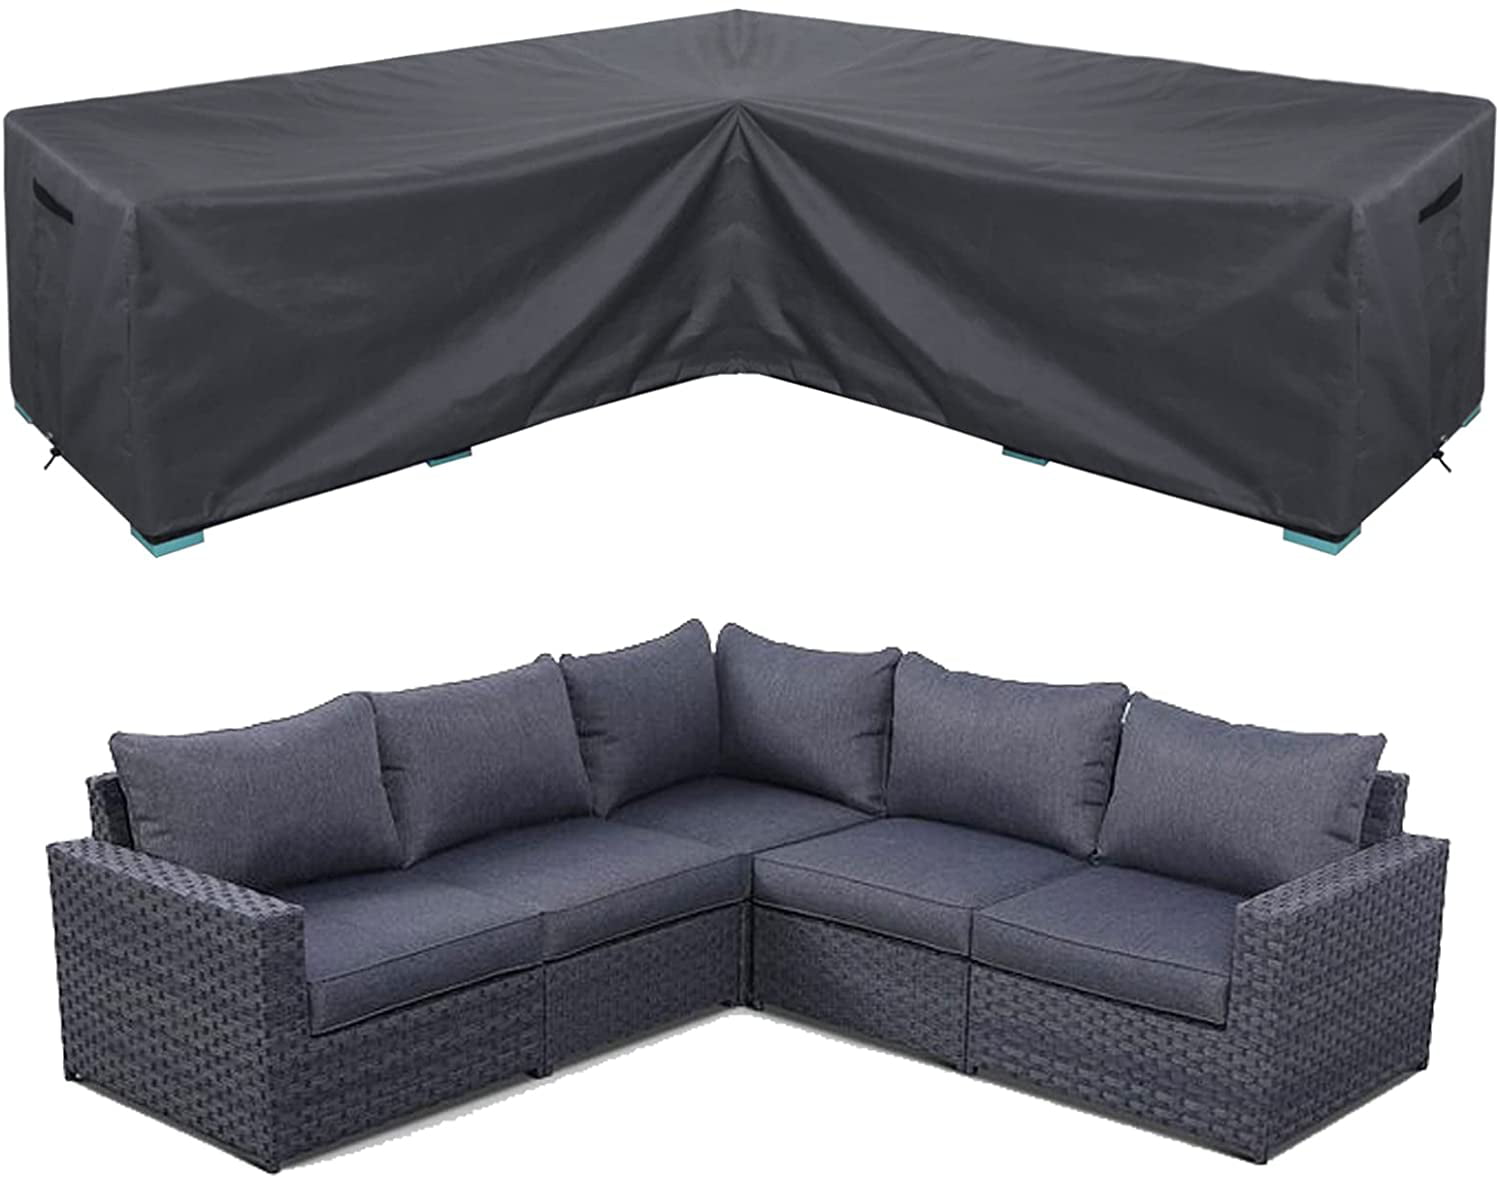 Outdoor Patio Furniture Cover L-Shaped Sectional Sofa Cover Waterproof Dustproof 